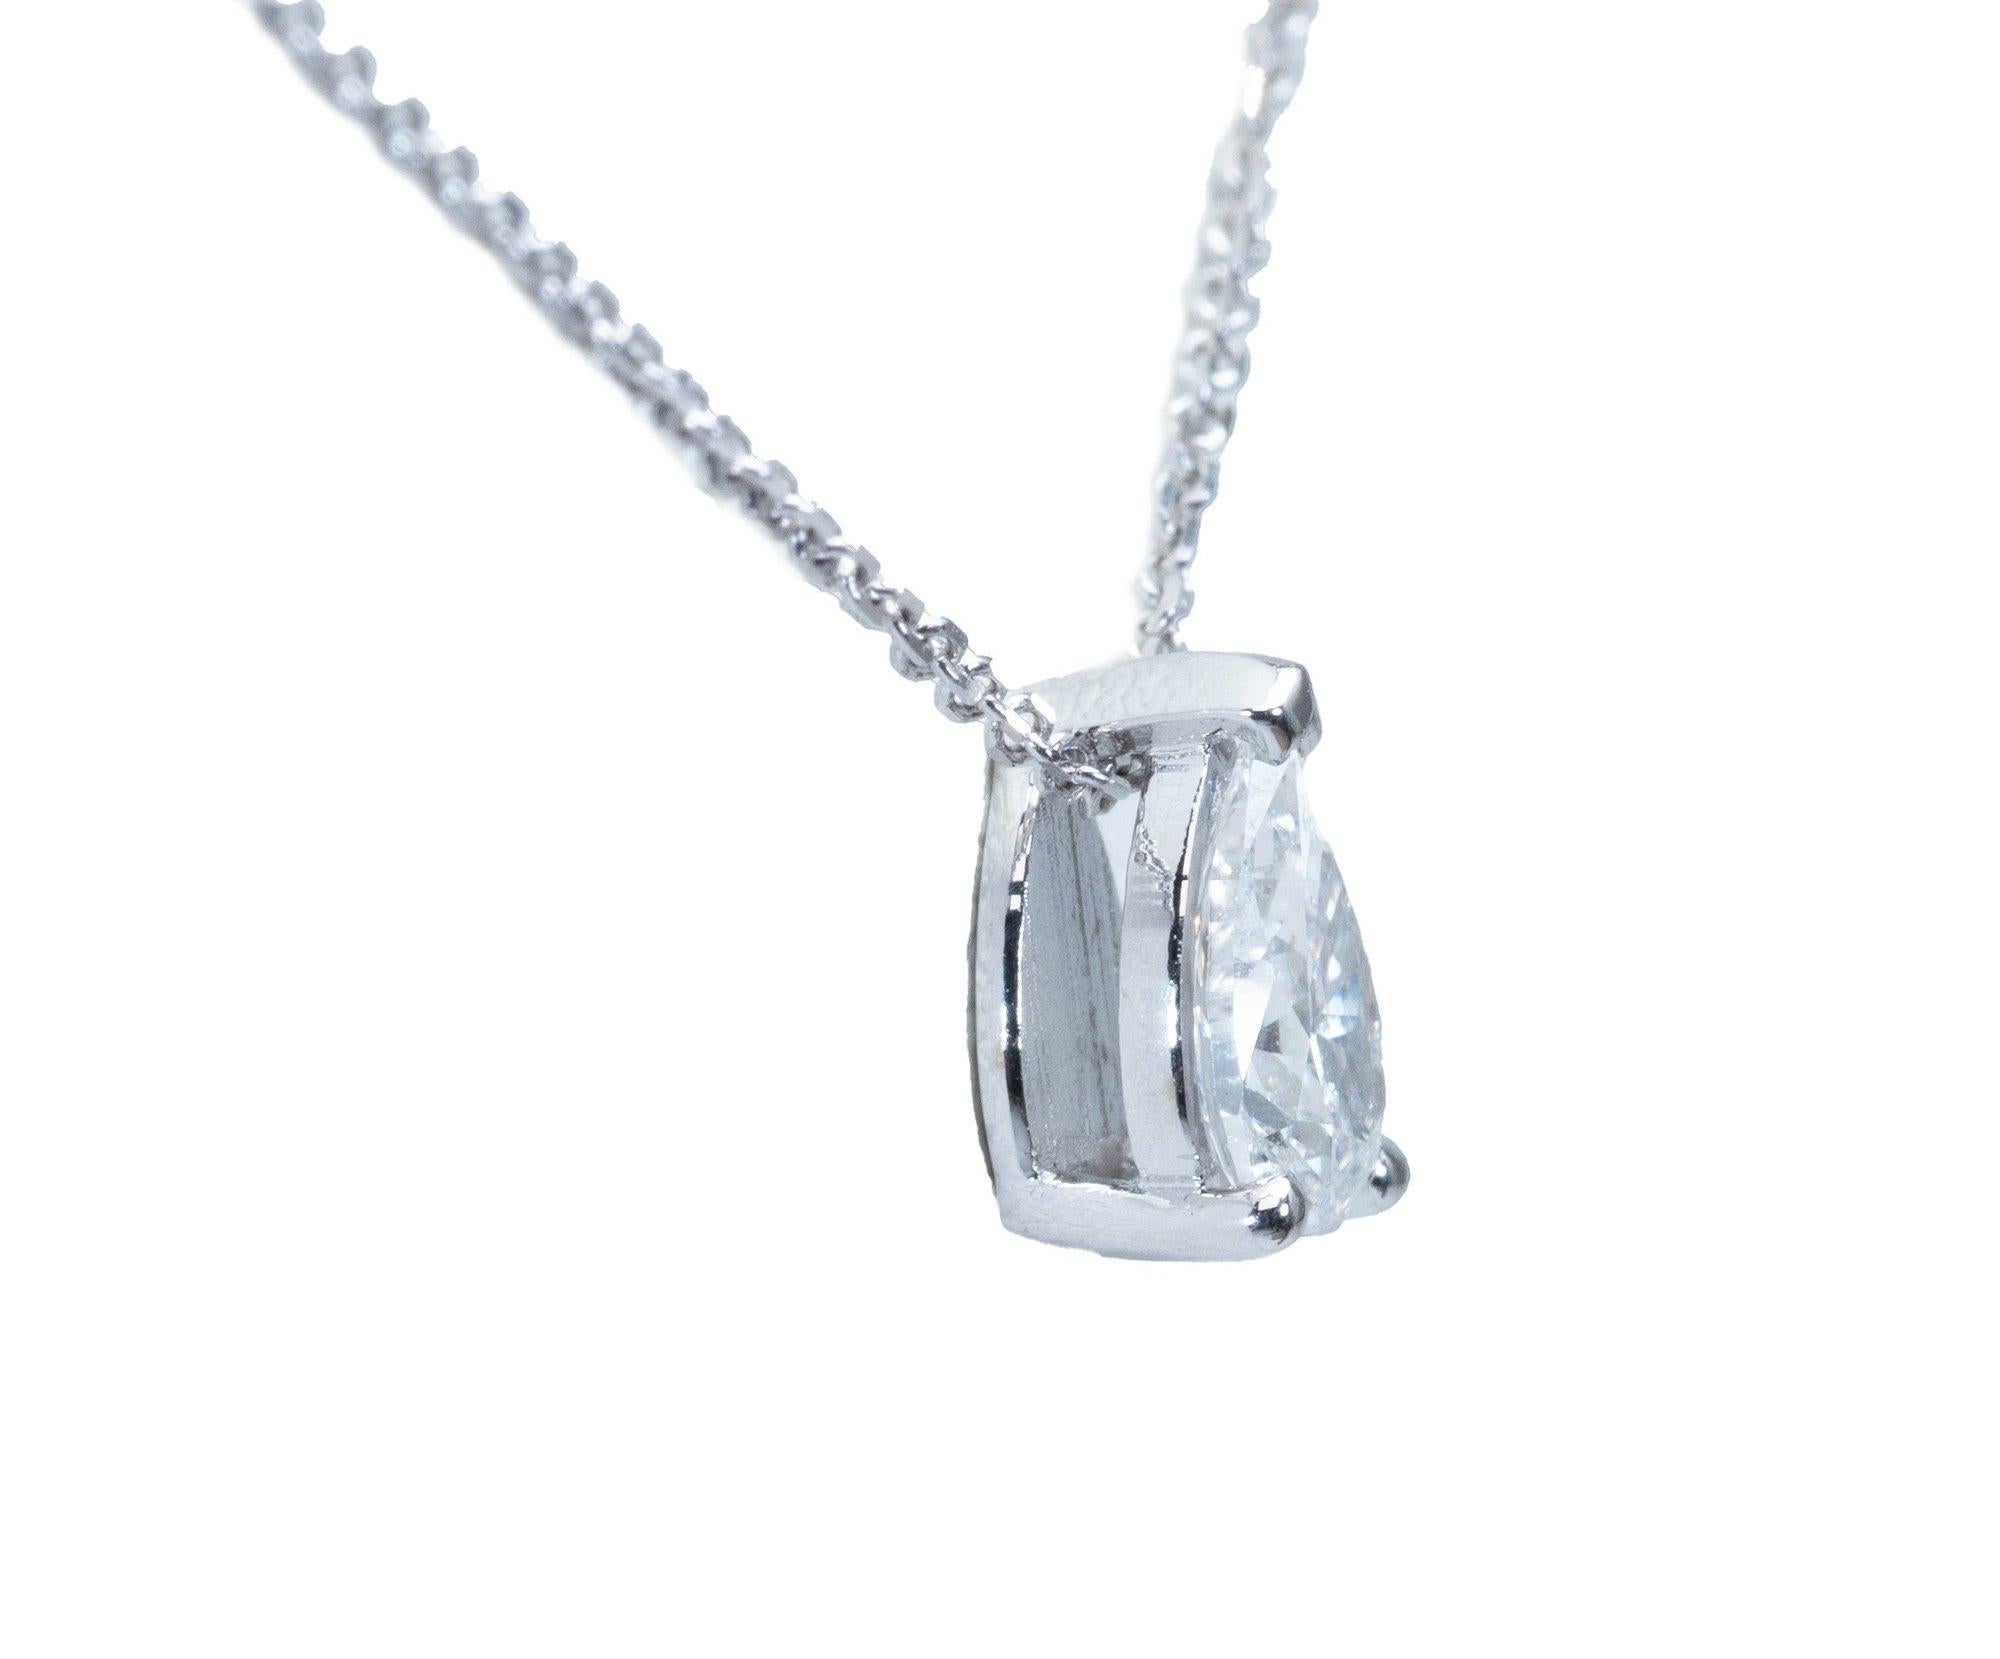 Beautiful classic solitaire pendant with chain made from 18k white gold with 0.39 carat of pear brilliant diamond. This pendant with chain comes with a GIA Certificate and a fancy box.

-1 diamond main stone of 0.39 ct.
cut: pear
color: F
clarity: